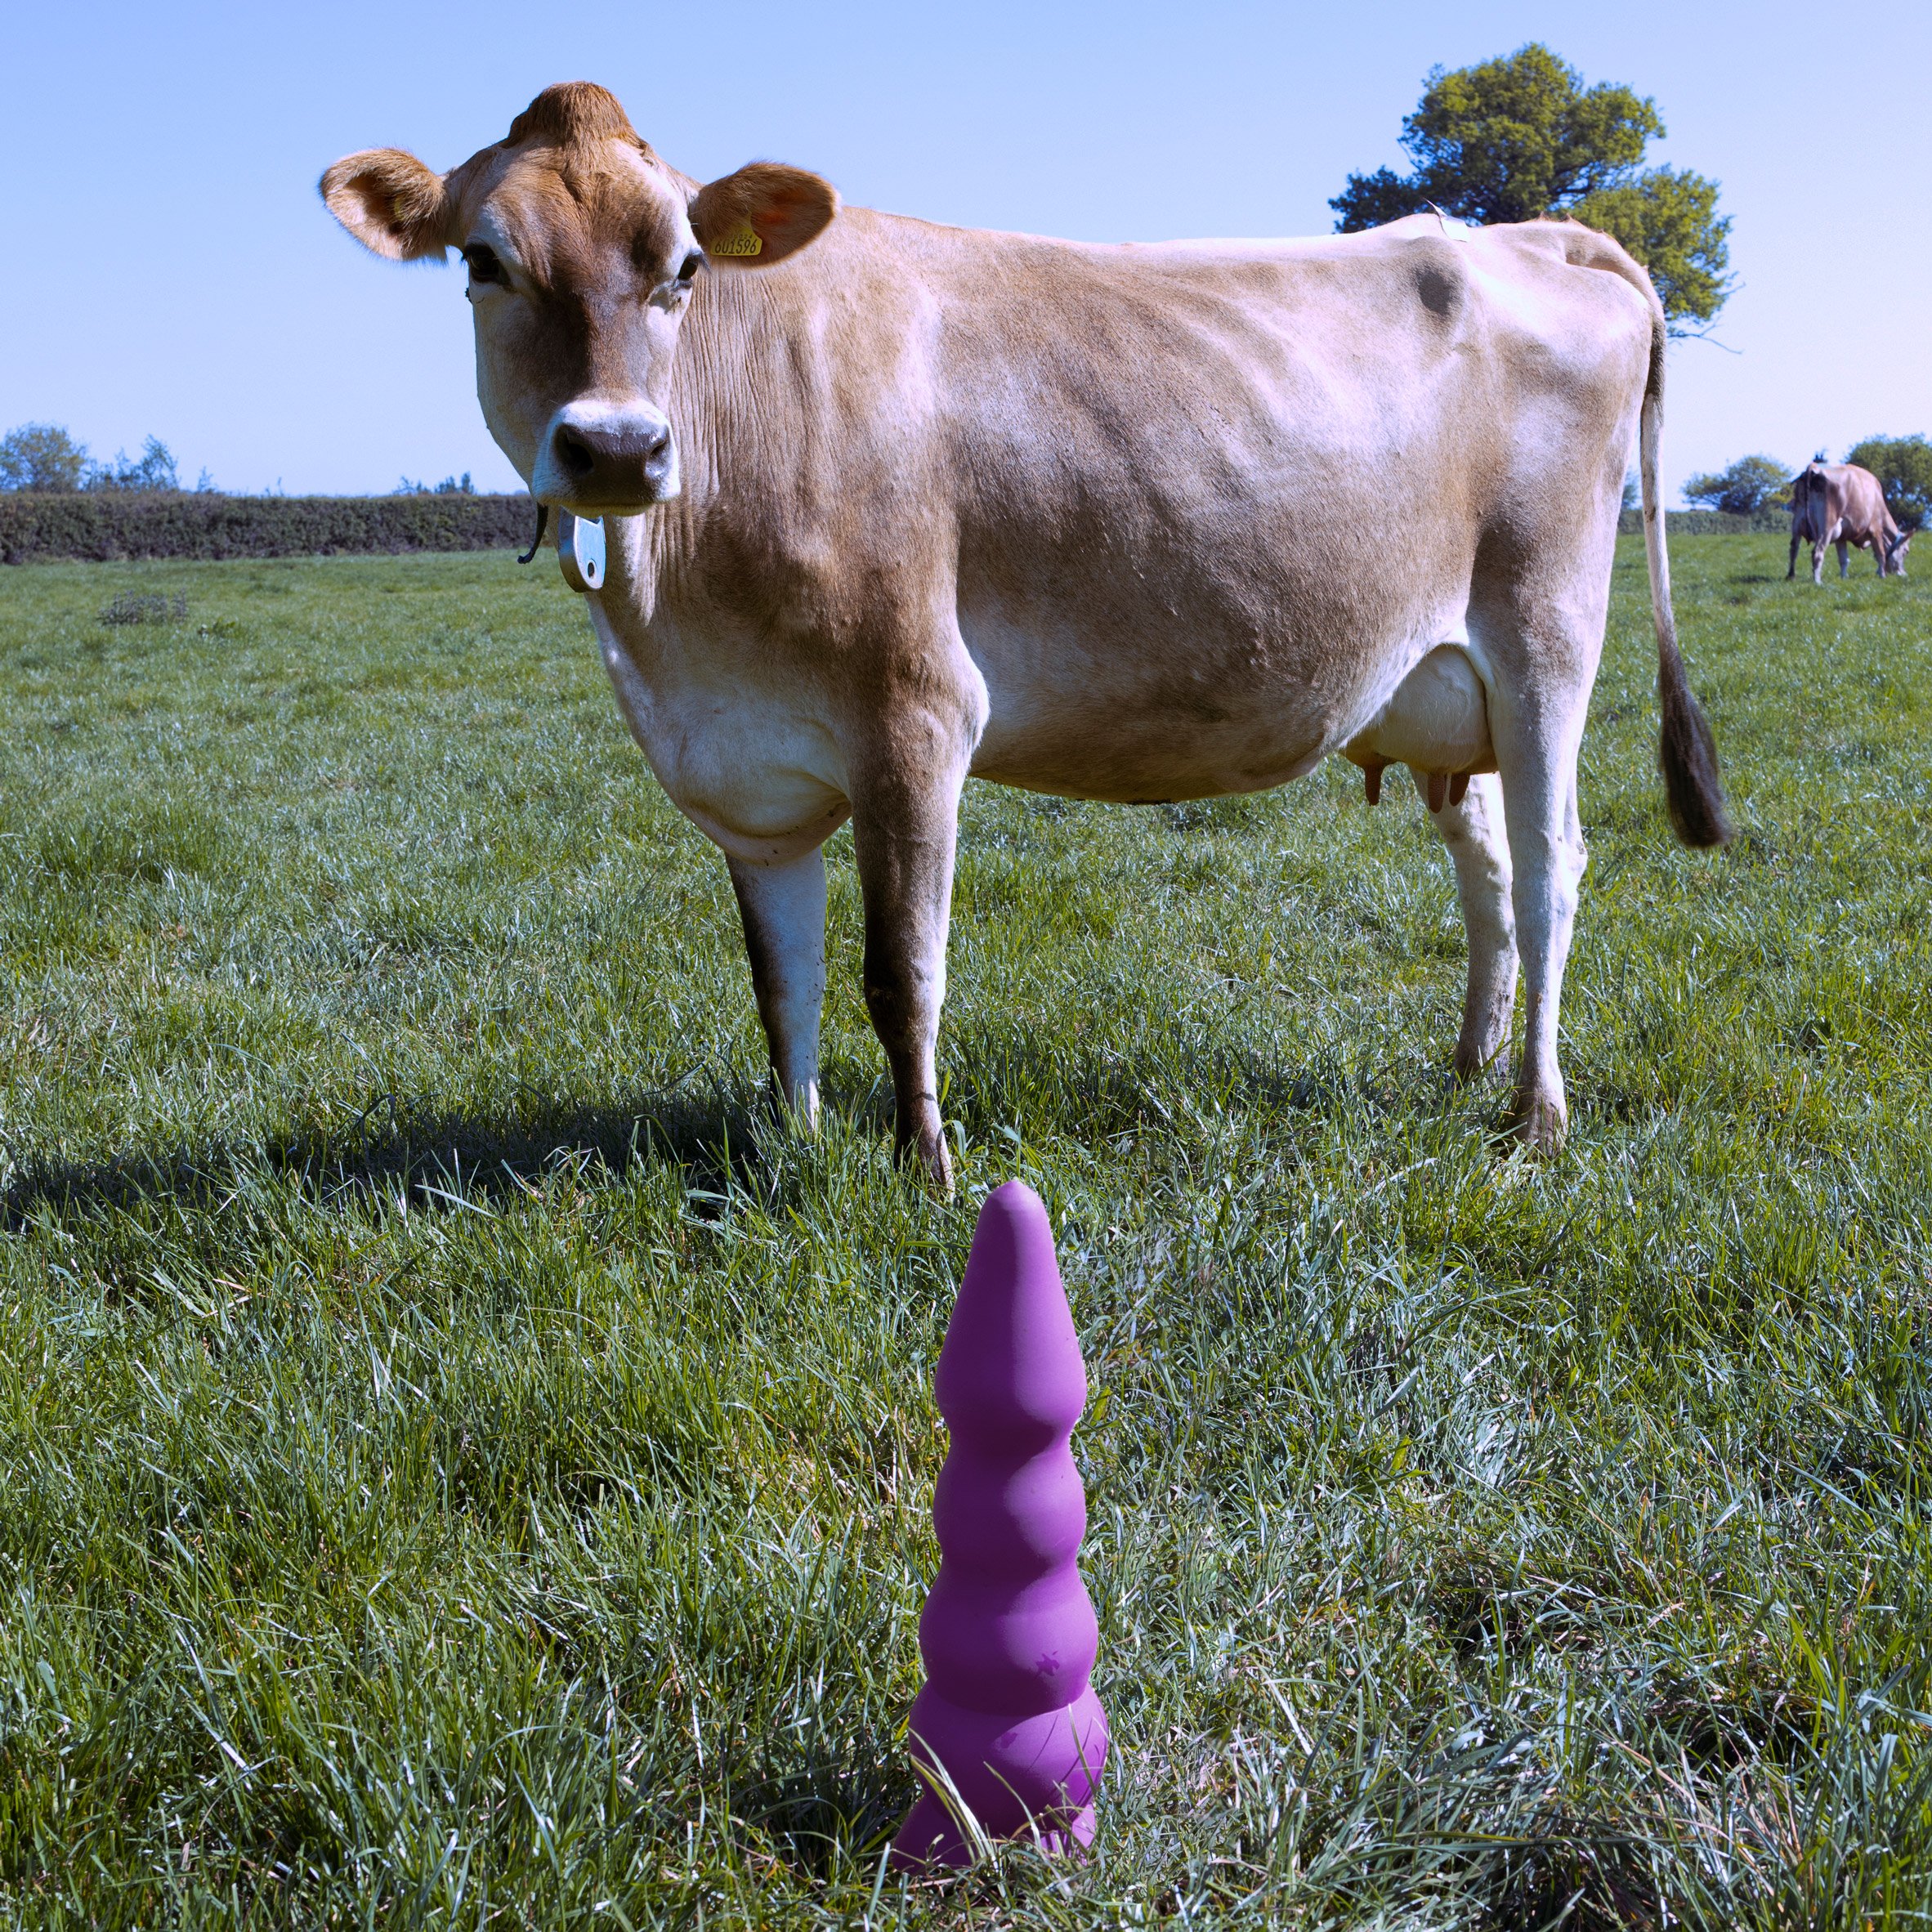 Ece Tan designs sex toys for cows to make farming practices more pleasurable picture